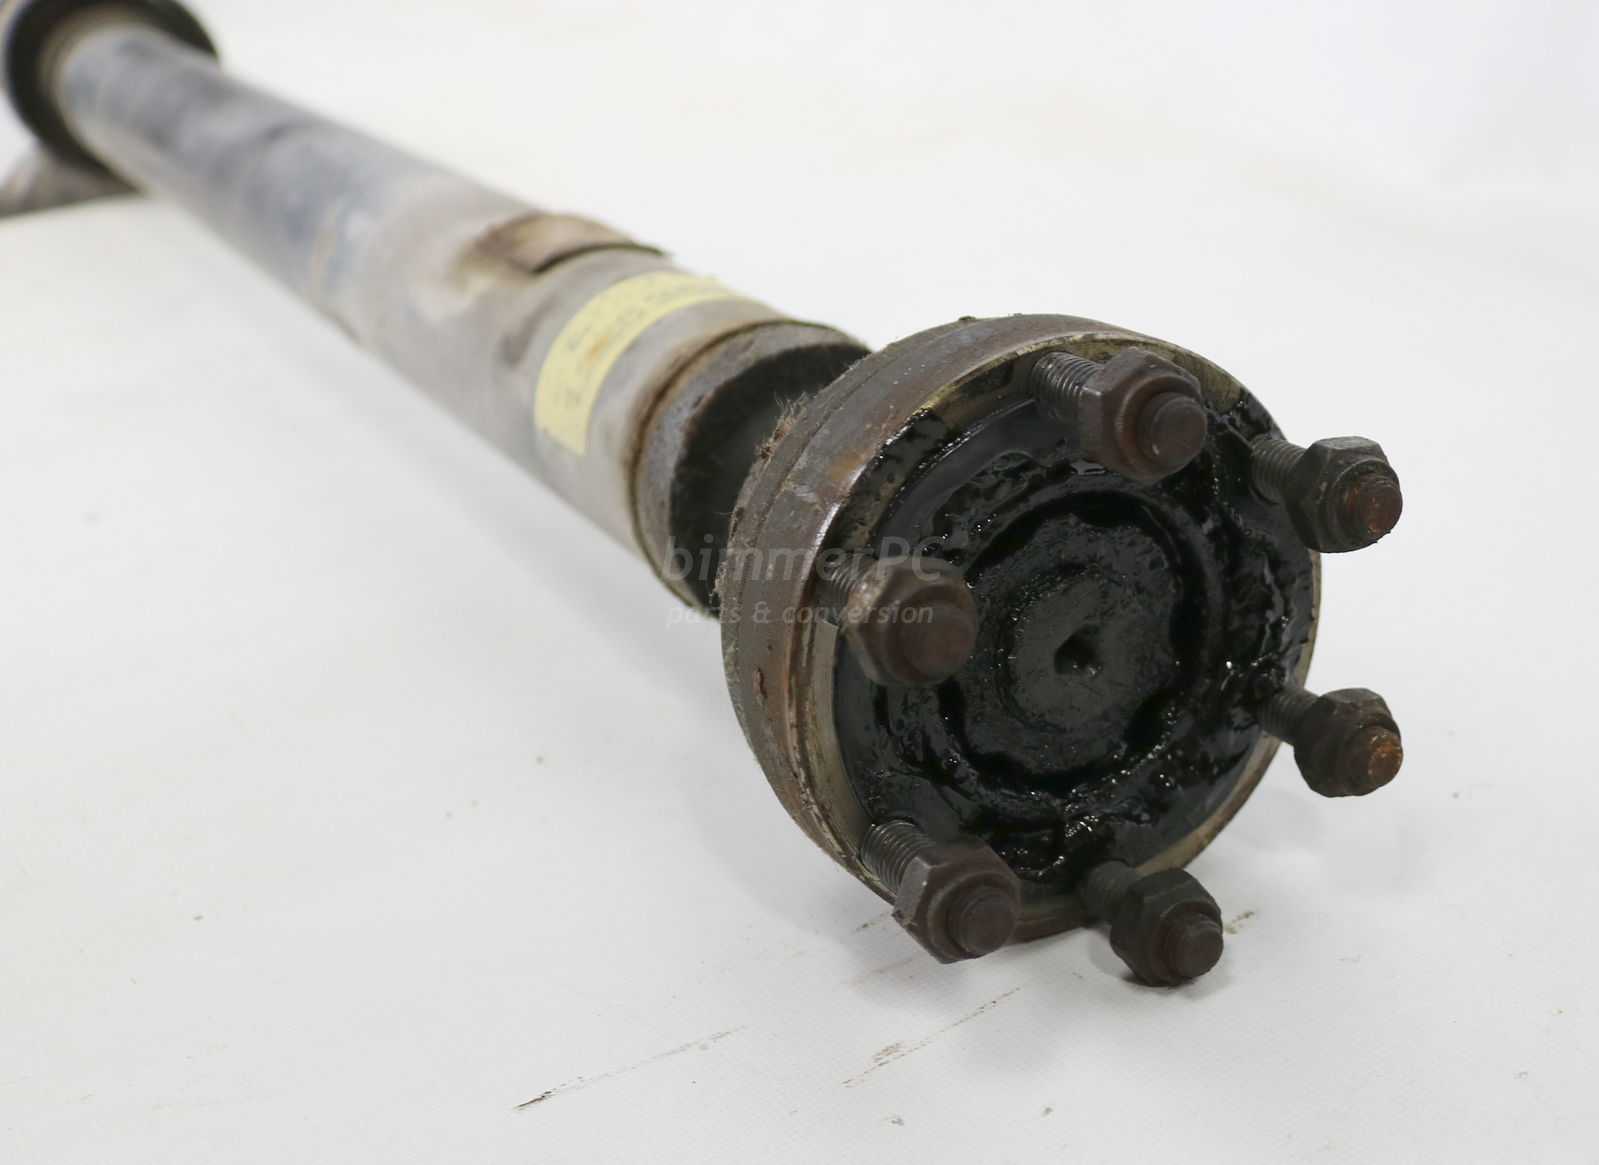 Picture of BMW 26111227202 Automatic Transmission Driveshaft M70 V12 750iL E32 for sale